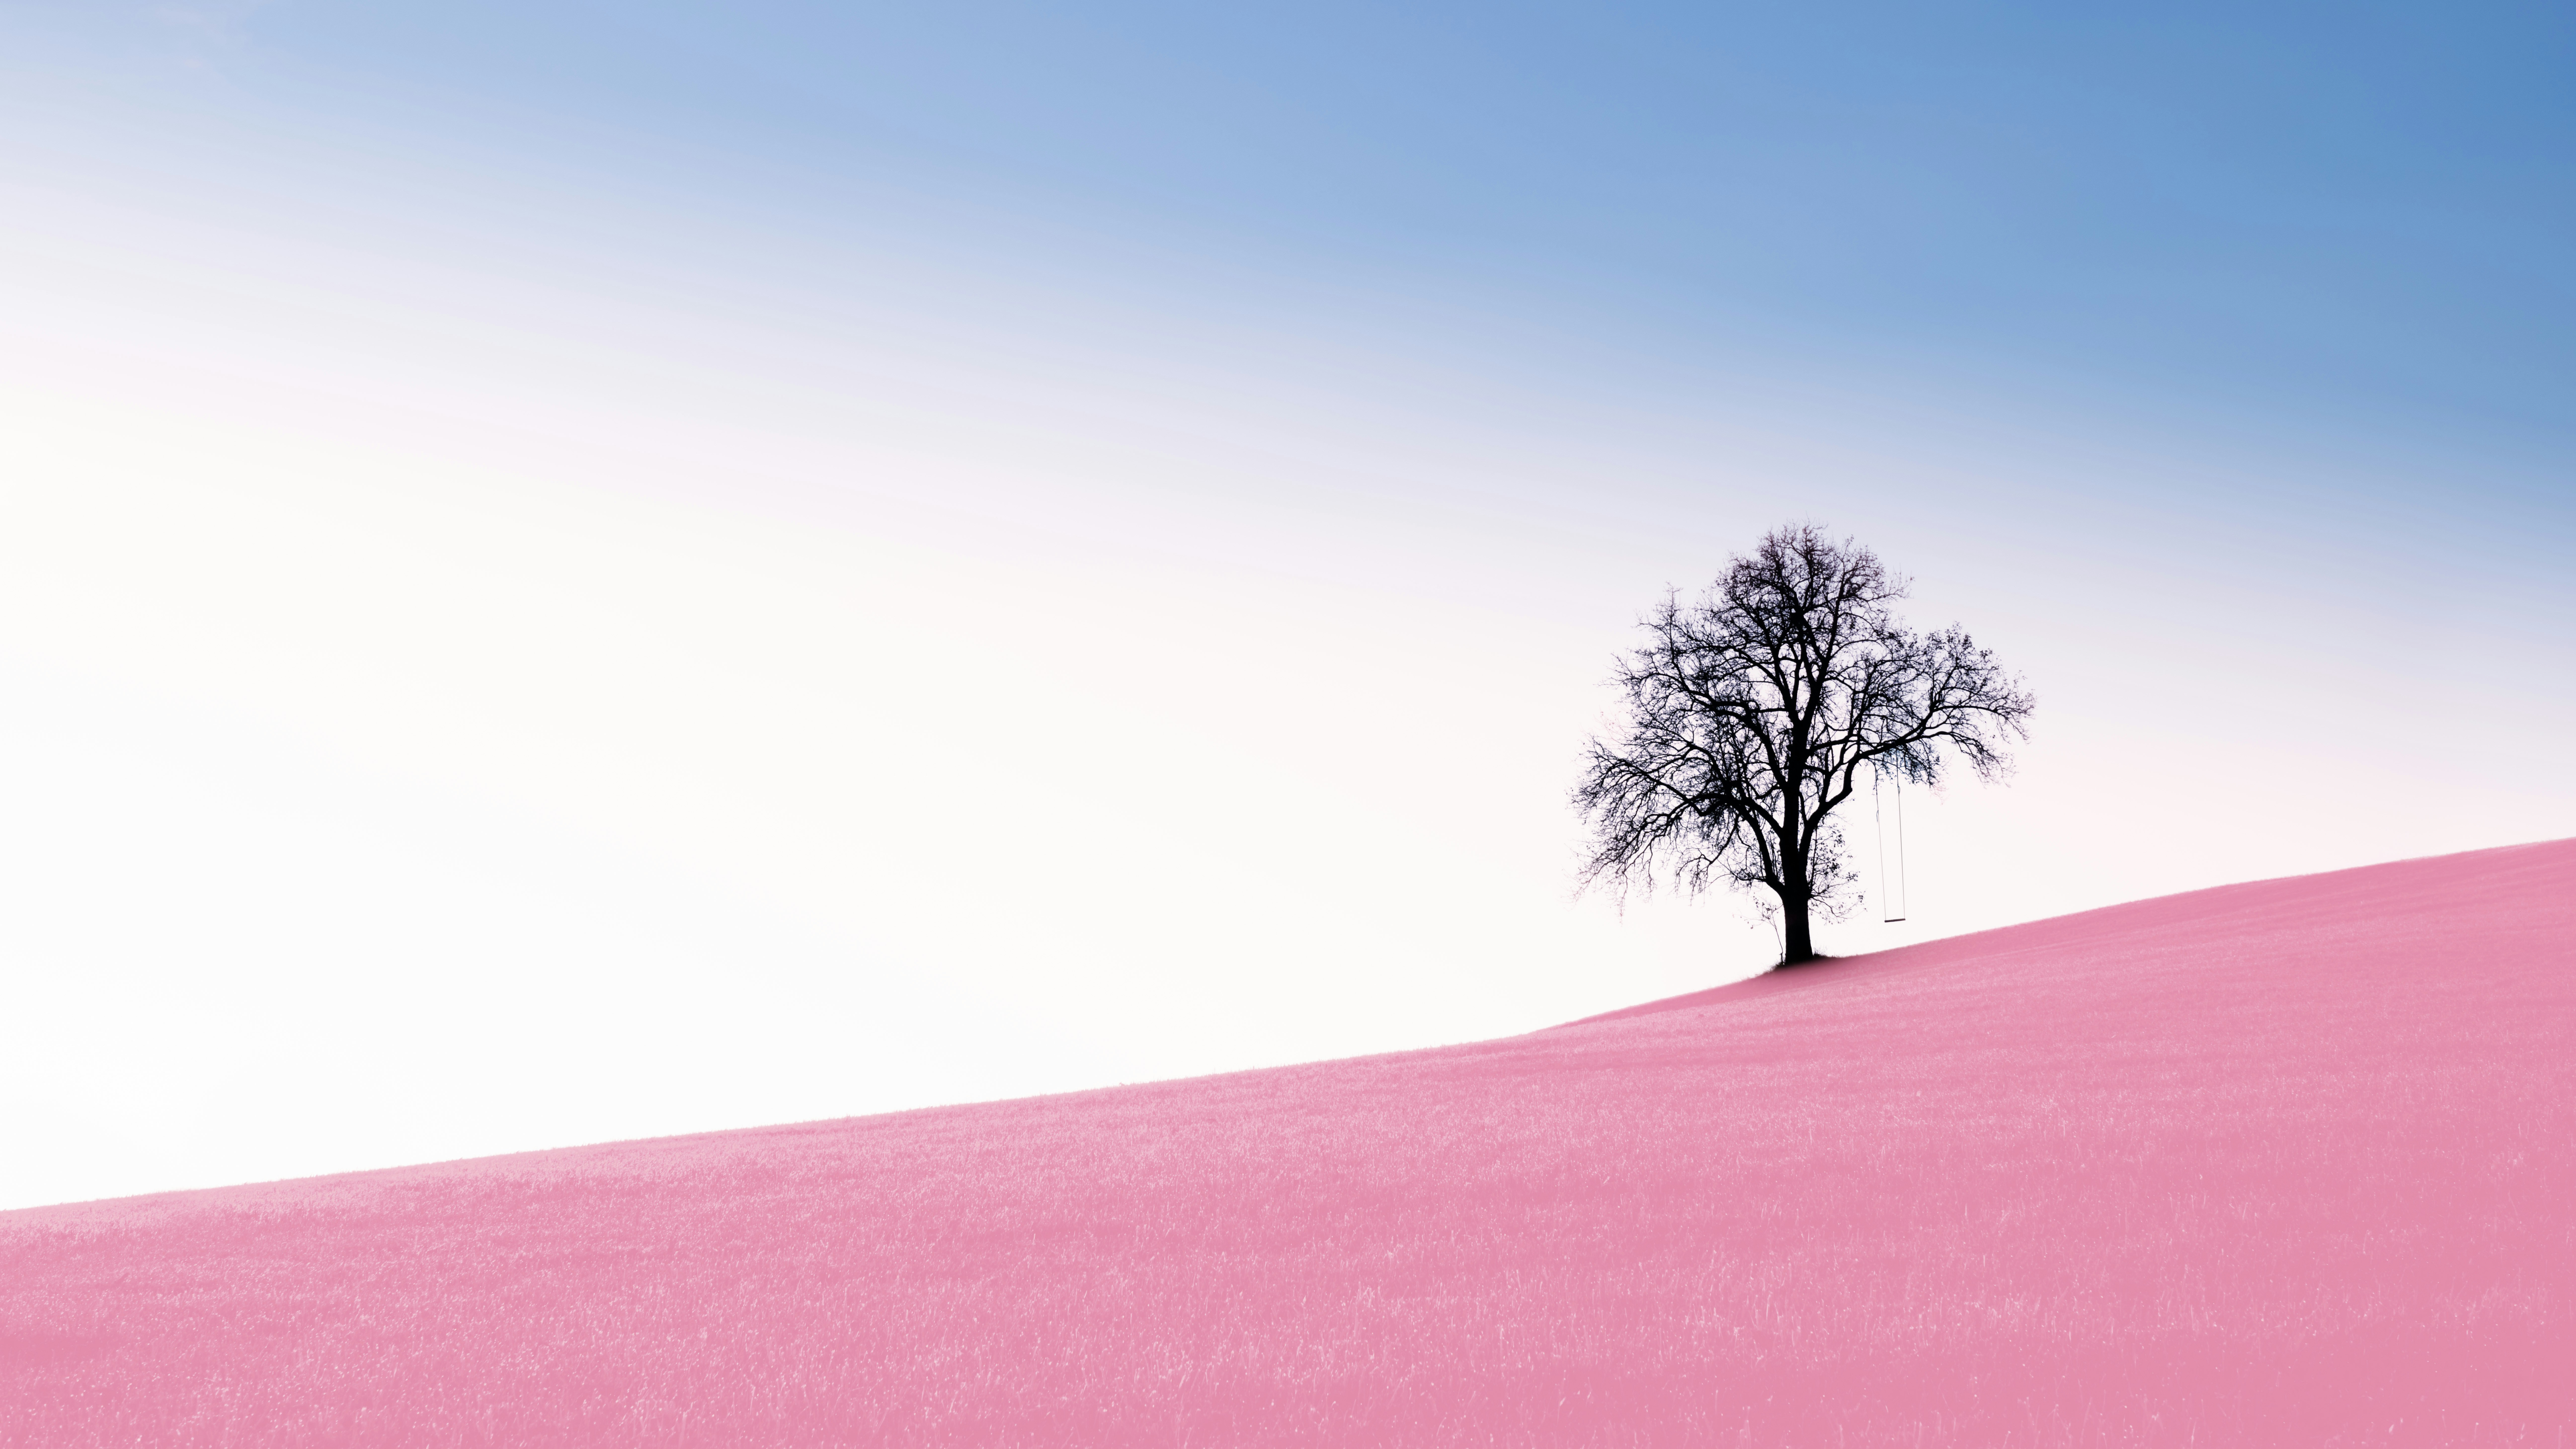 Tree with swing, surrounded by pink grass, pale blue sky